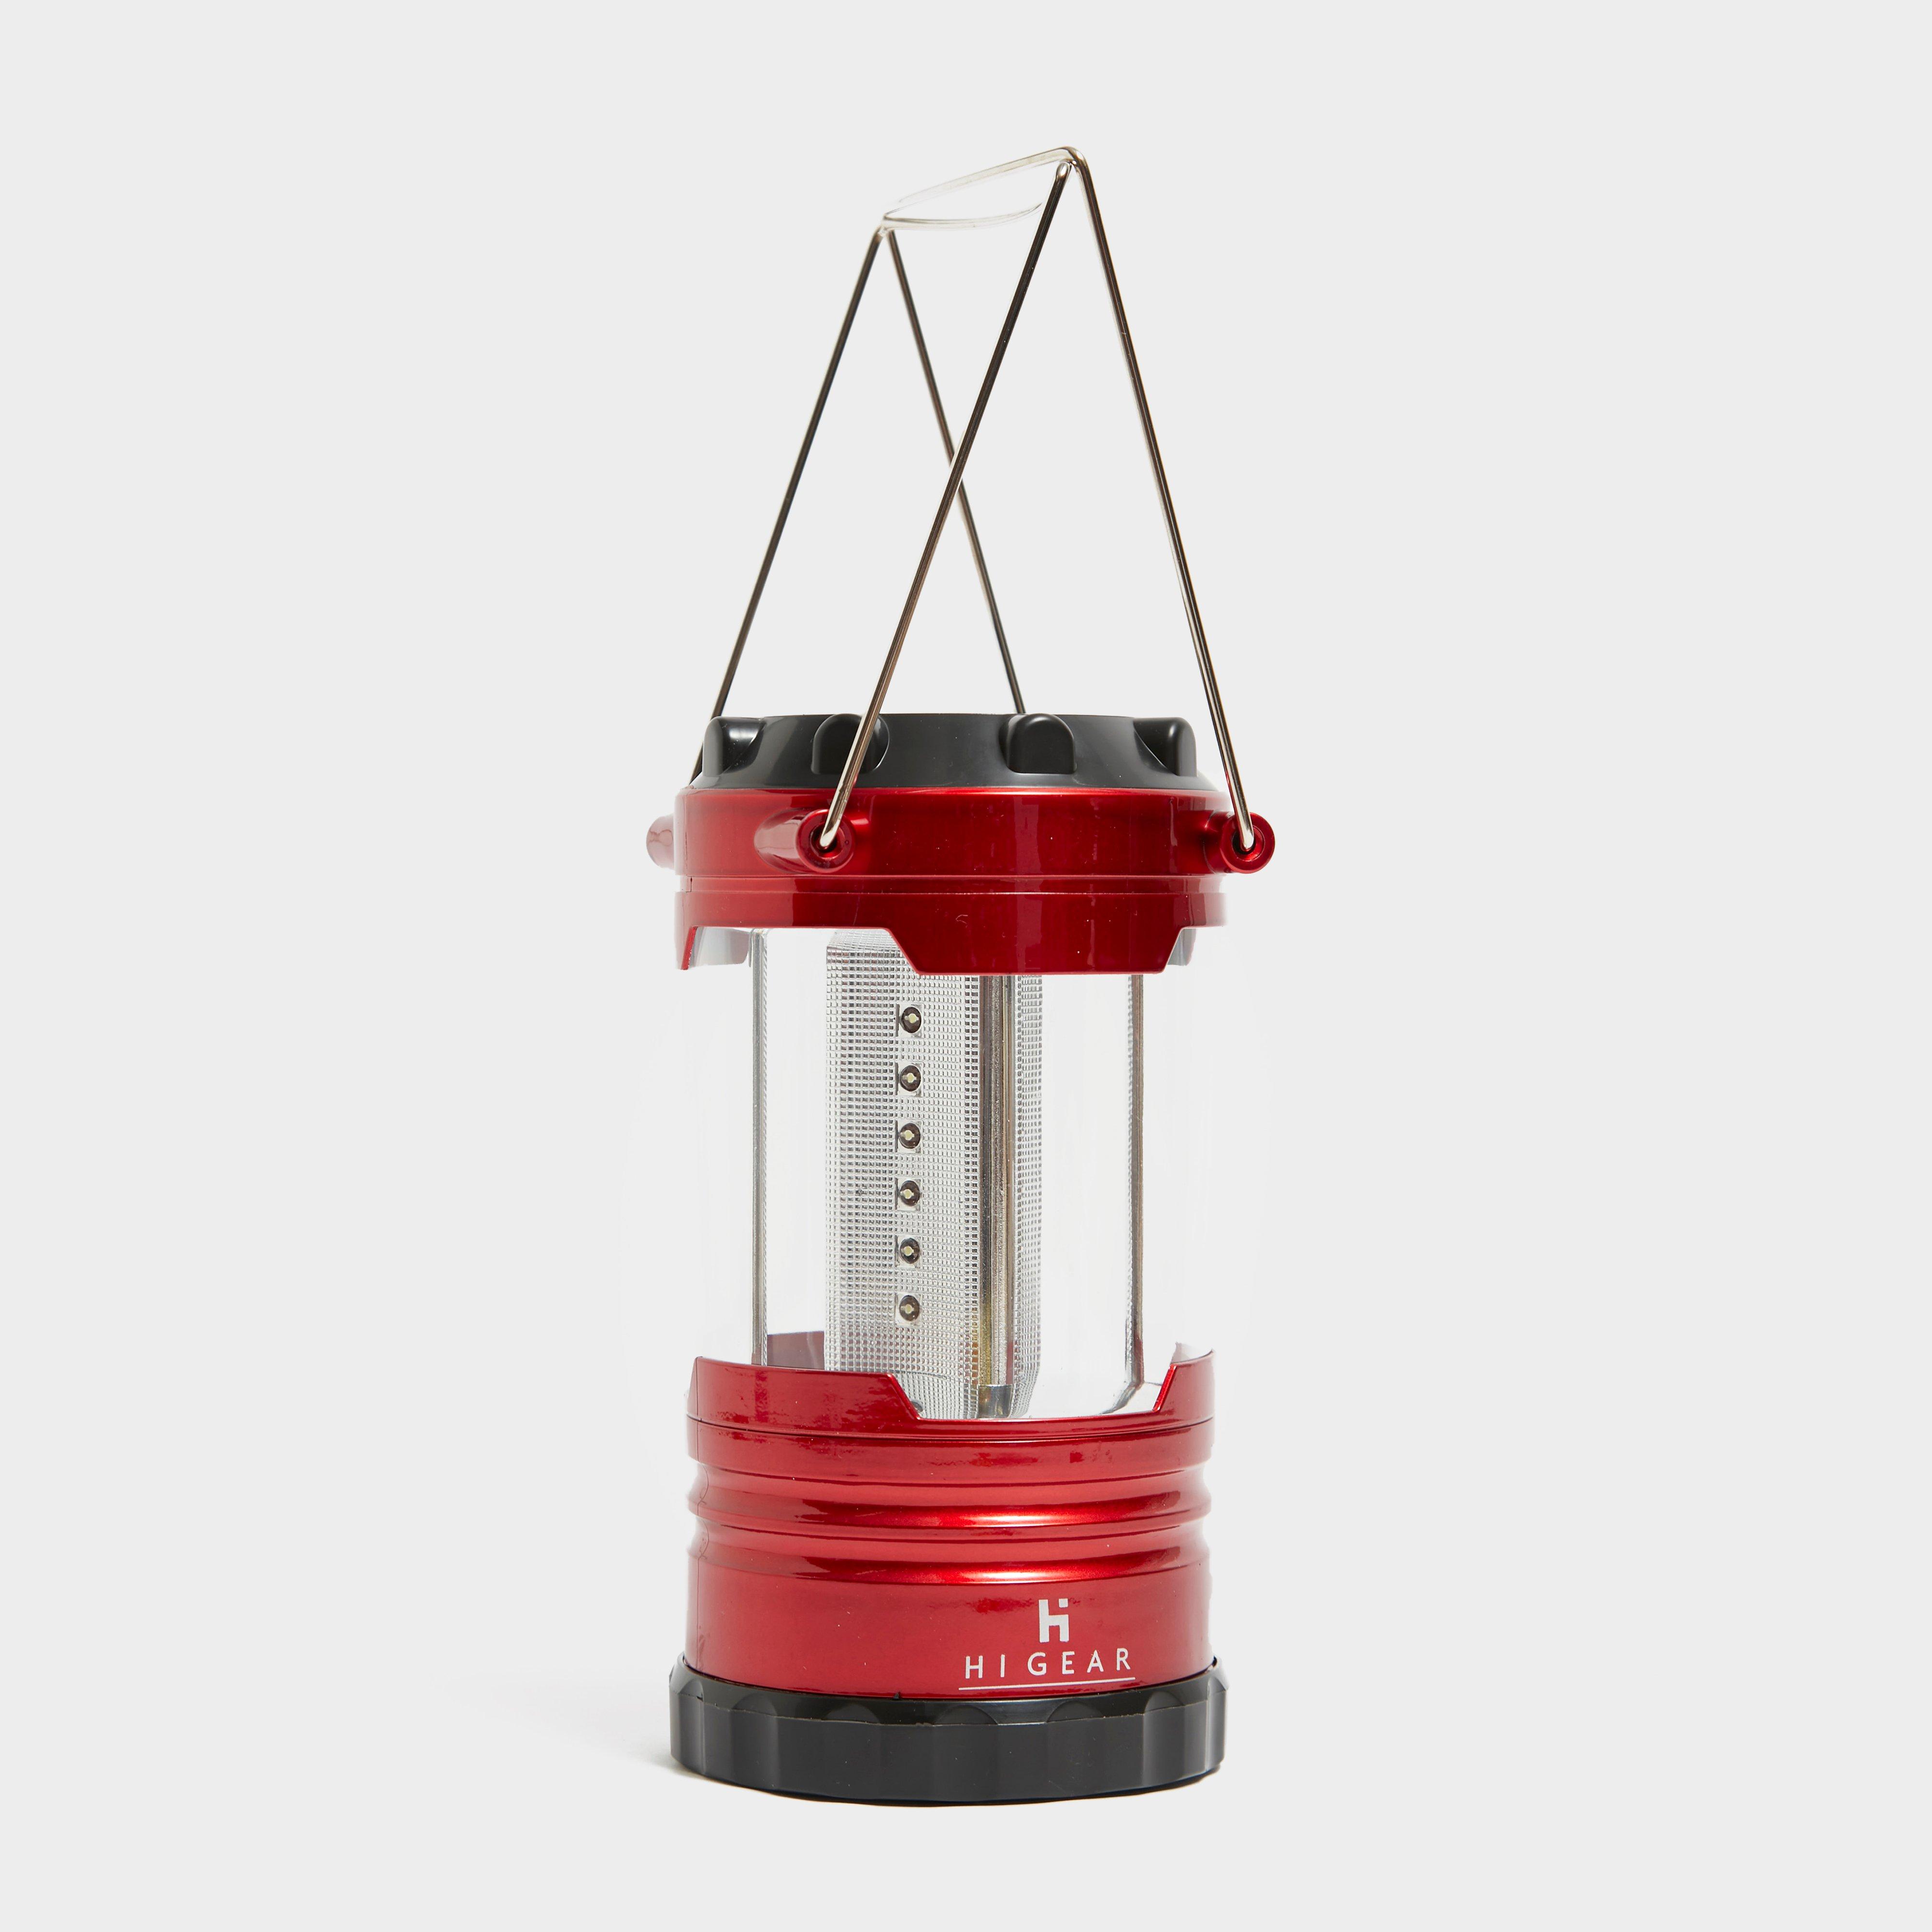 Hi-gear 18 Led Camping Lantern - Red/red  Red/red